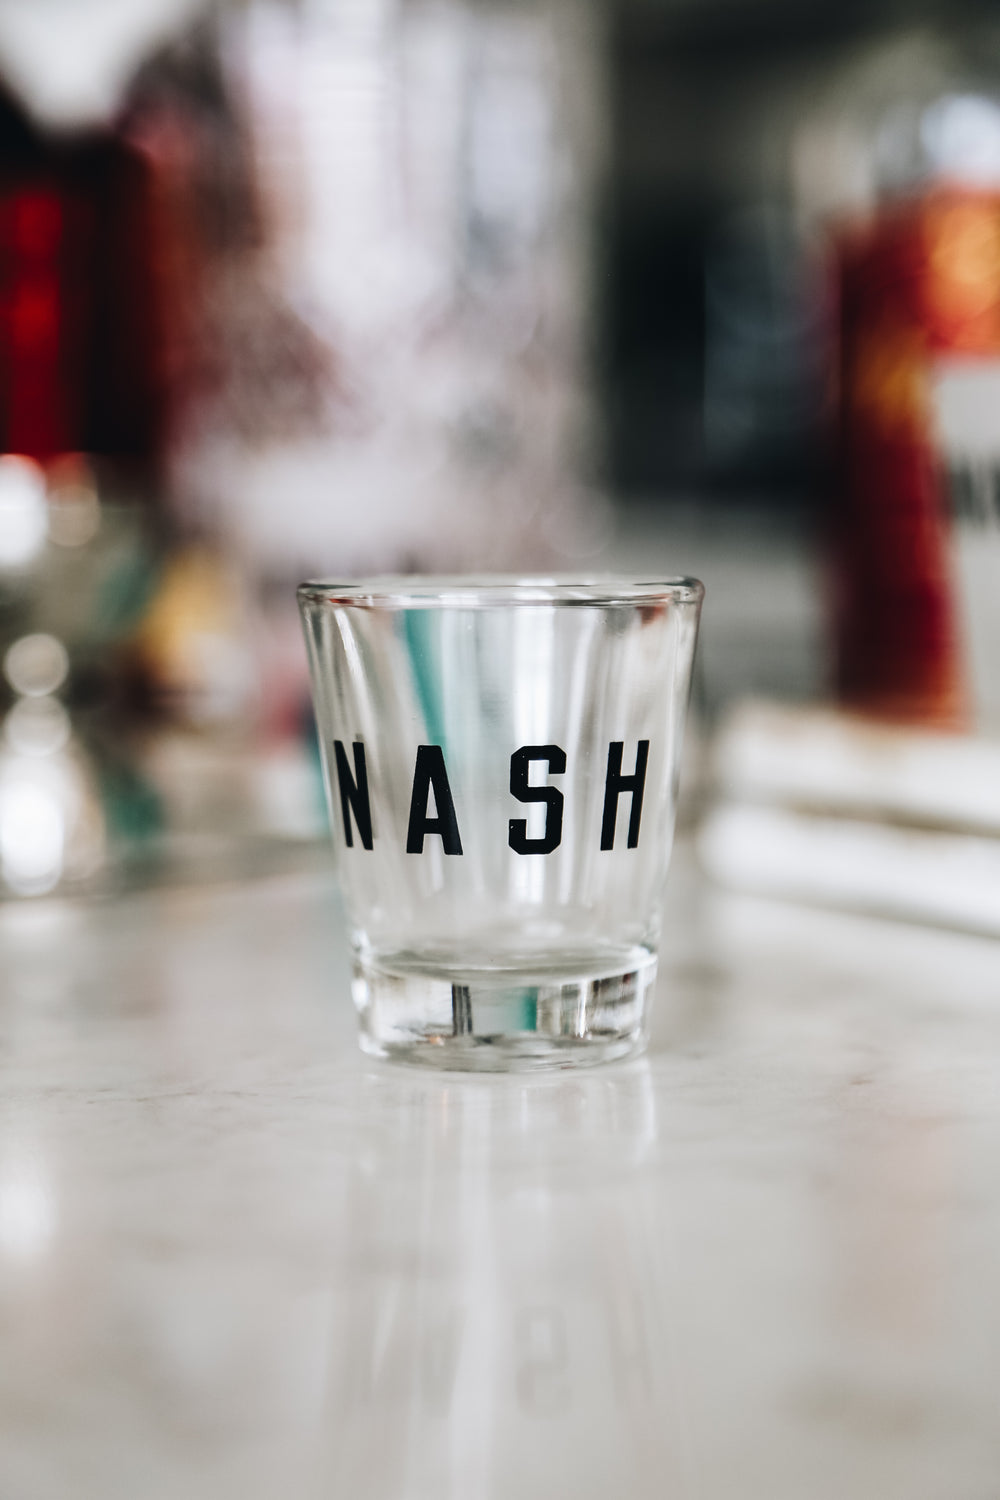 Yeti Beverage Bucket [Camp Green] – The Nash Collection